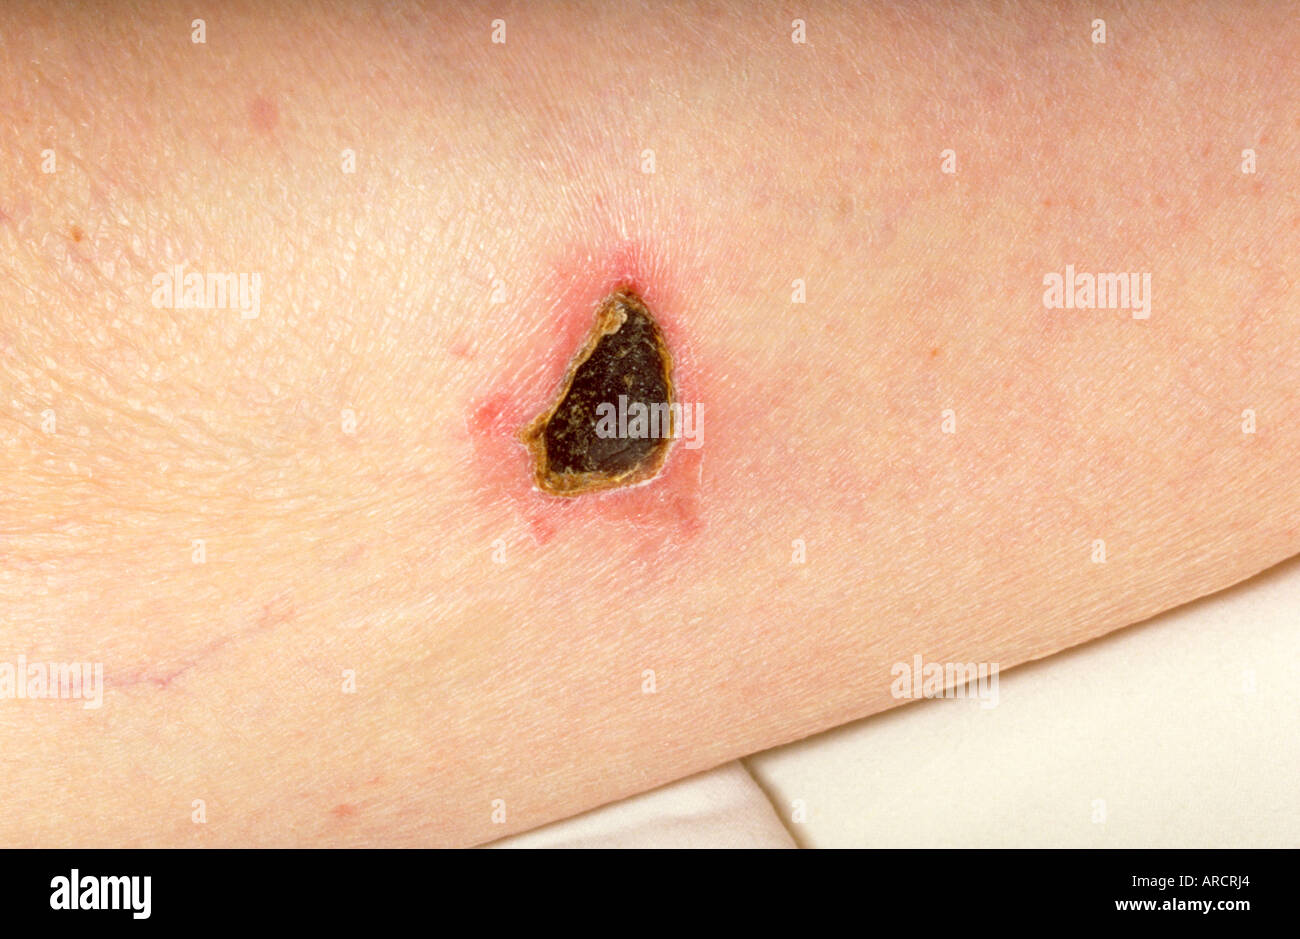 Bullous or blistering drug eruptions are among the most serious types of adverse drug reactions. Stock Photo